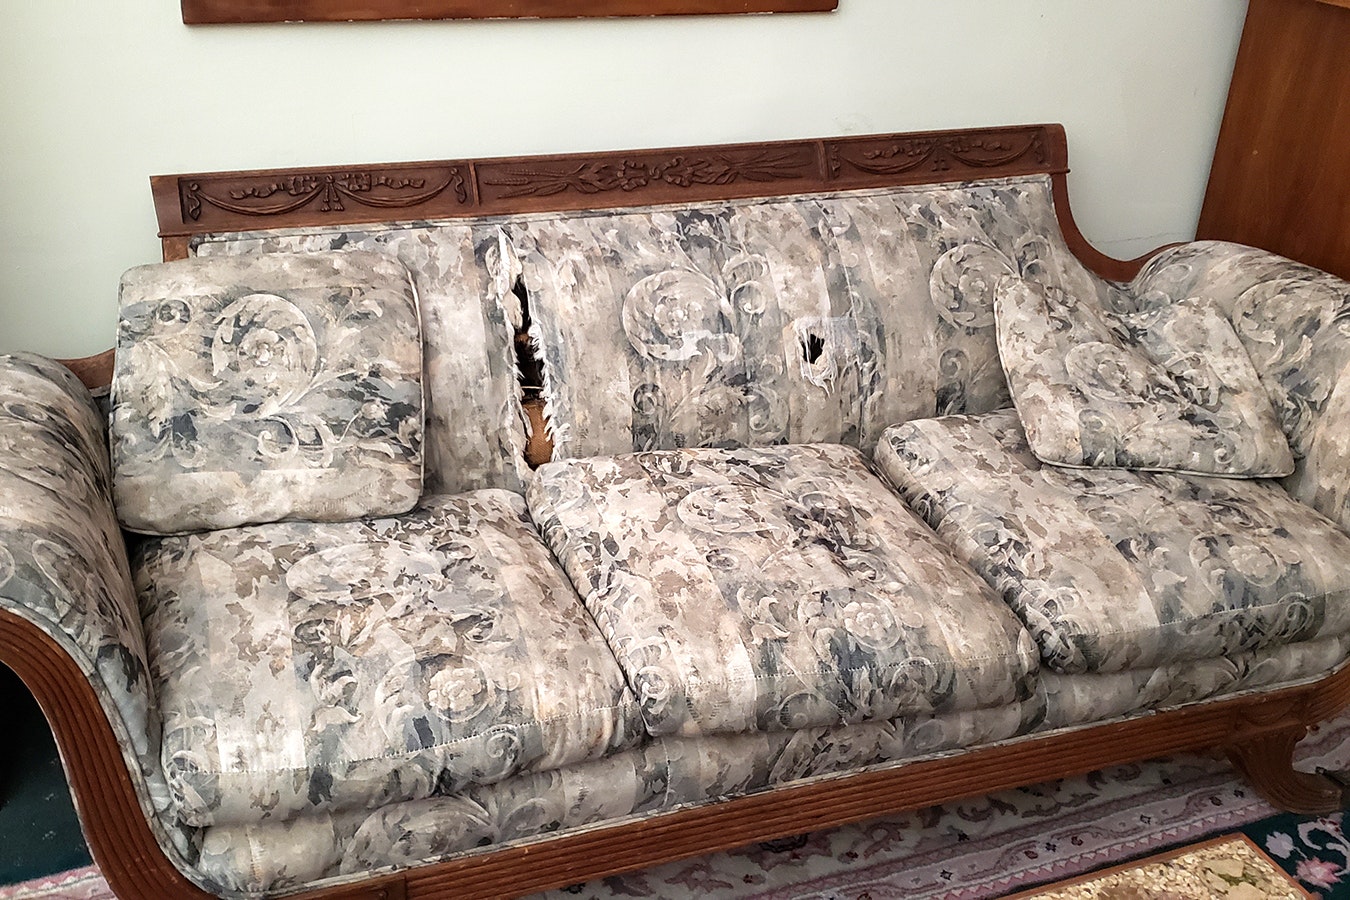 The Herbert Hoover couch looks like it should be sitting on a curb as trash instead of having an honored place in the historic Occidental Hotel. It was once owned by President Herbert Hoover, and popular lore has it the rips and tears in it were caused by fishhooks Hoover would keep in his pockets.